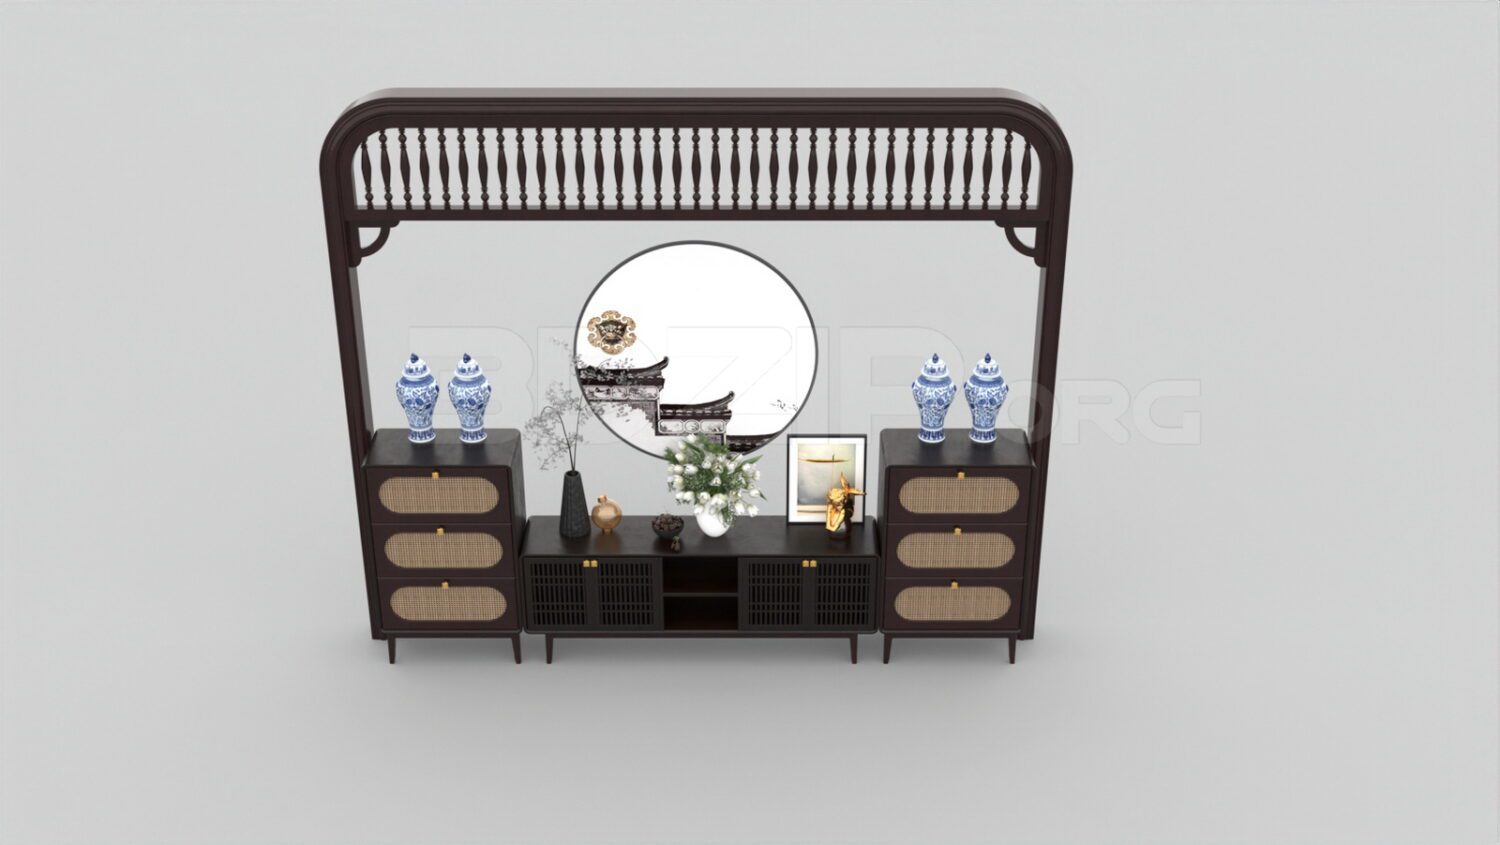 3580. Free 3D Display Cabinets Model Download